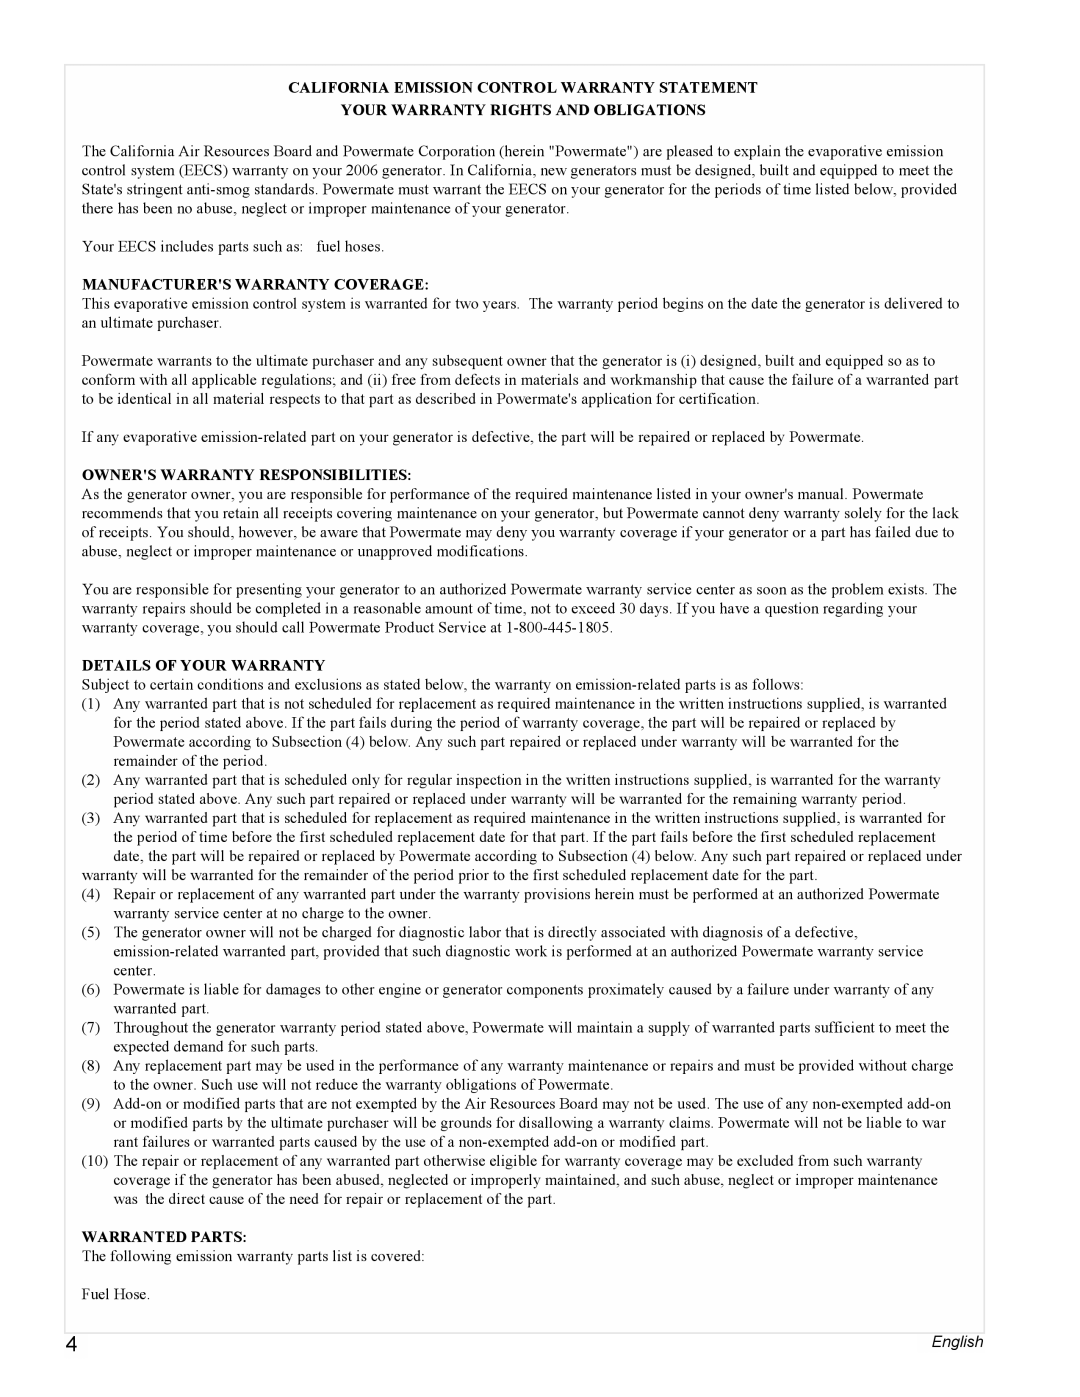 Powermate PMC505622 California Emission Control Warranty Statement, Your Warranty Rights And Obligations, Warranted Parts 